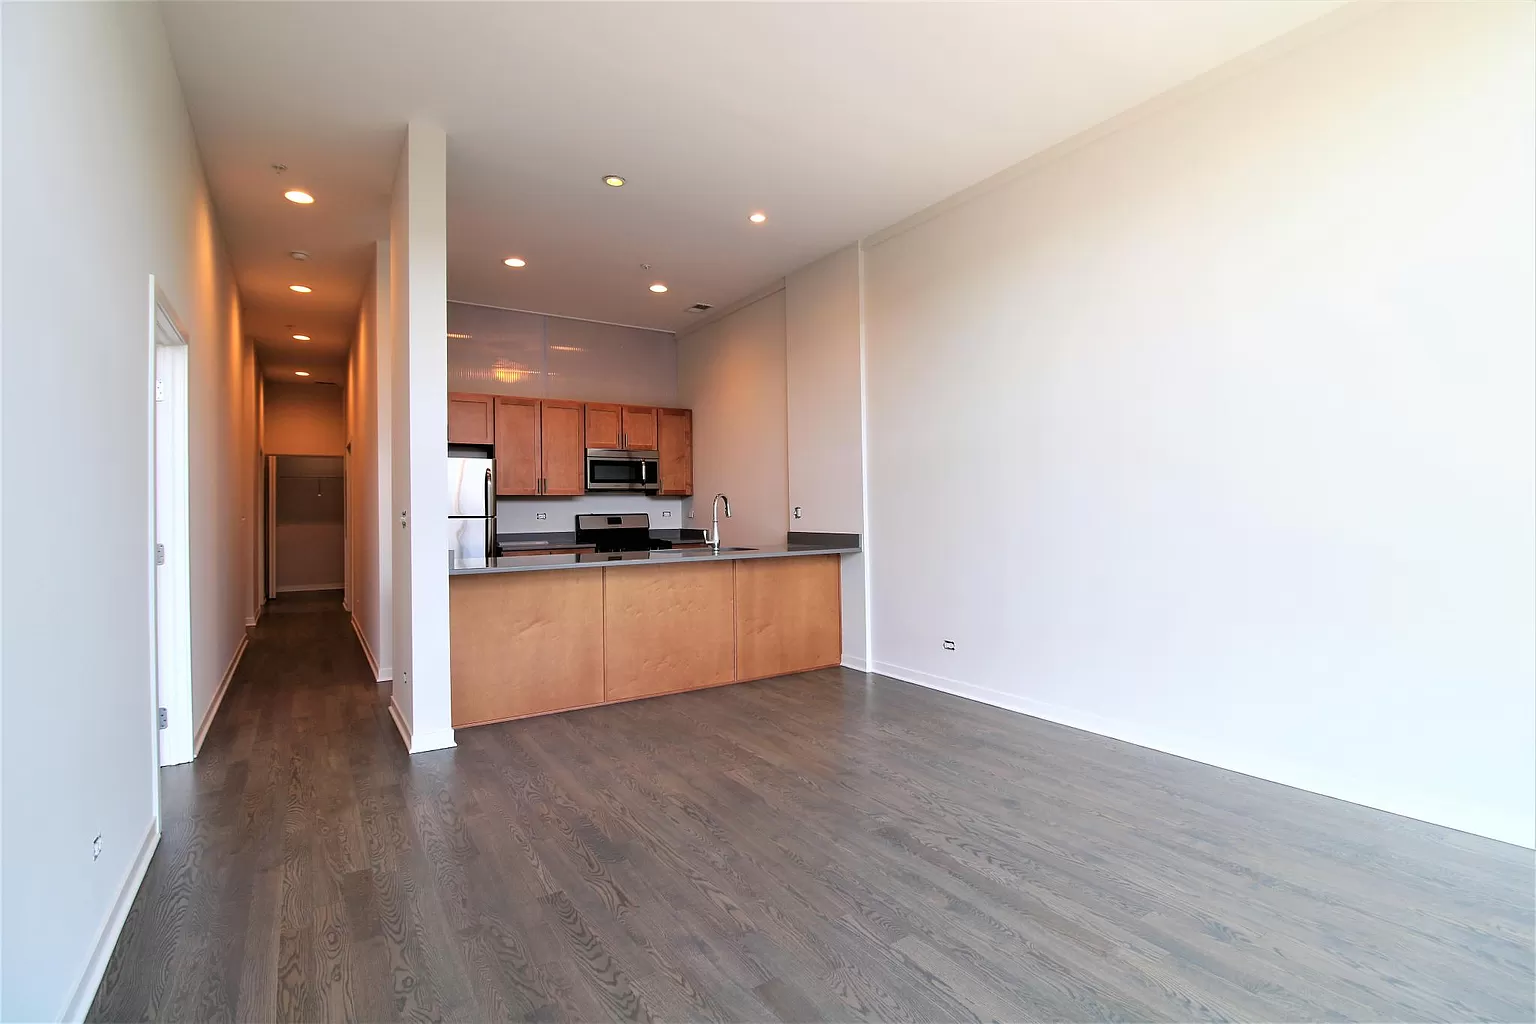 Columbia Housing 2.5 Bed 2 bath apartment - Available for lease takeover or looking for a room mate for Columbia College Chicago Students in Chicago, IL